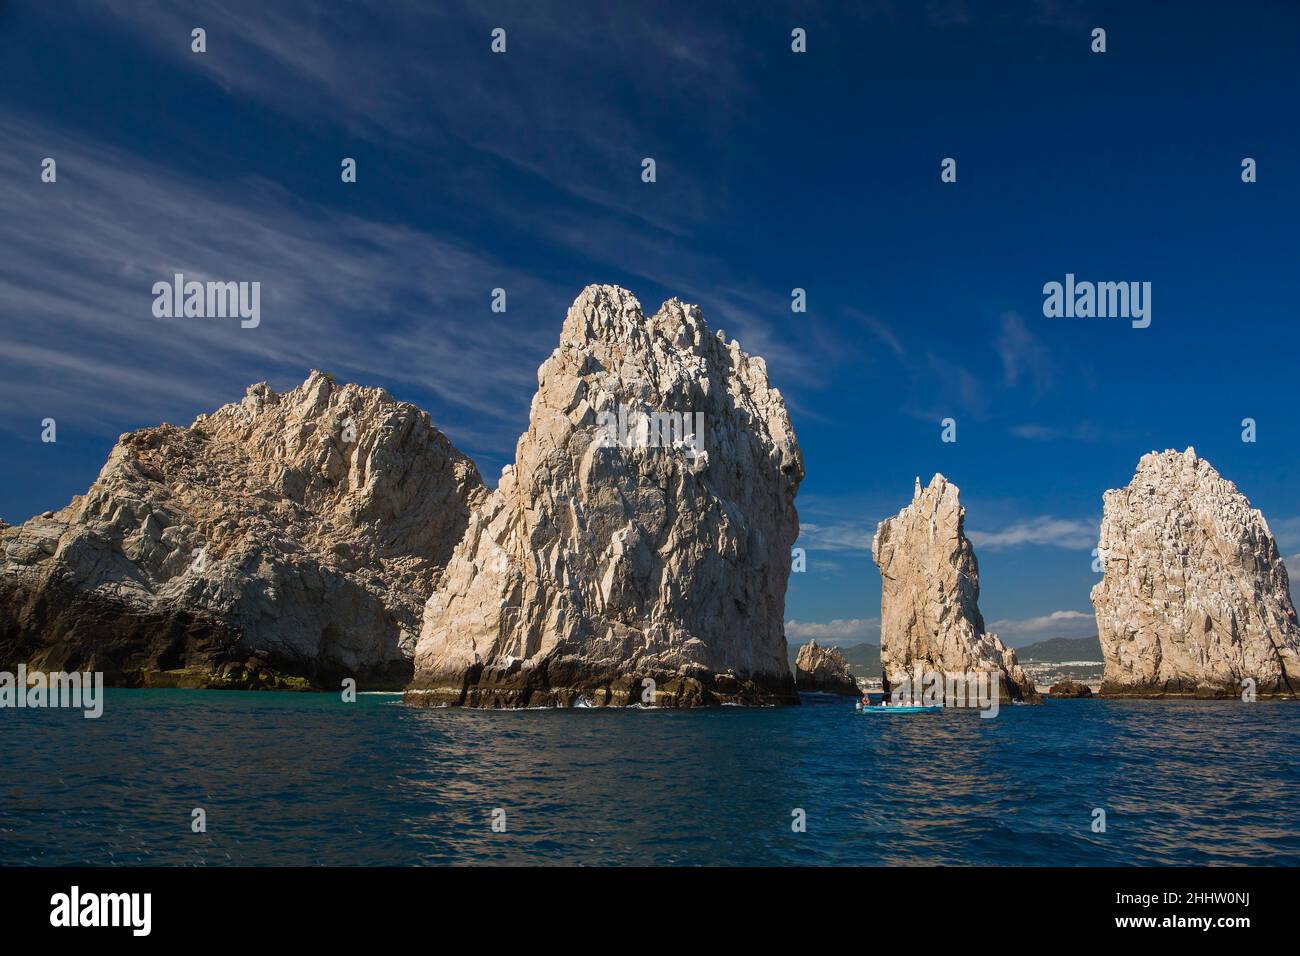 A glass bottom boat takes tourists around rock formations near the Arch in Cabo San Lucas, Baja California Sur, Mexico Stock Photo